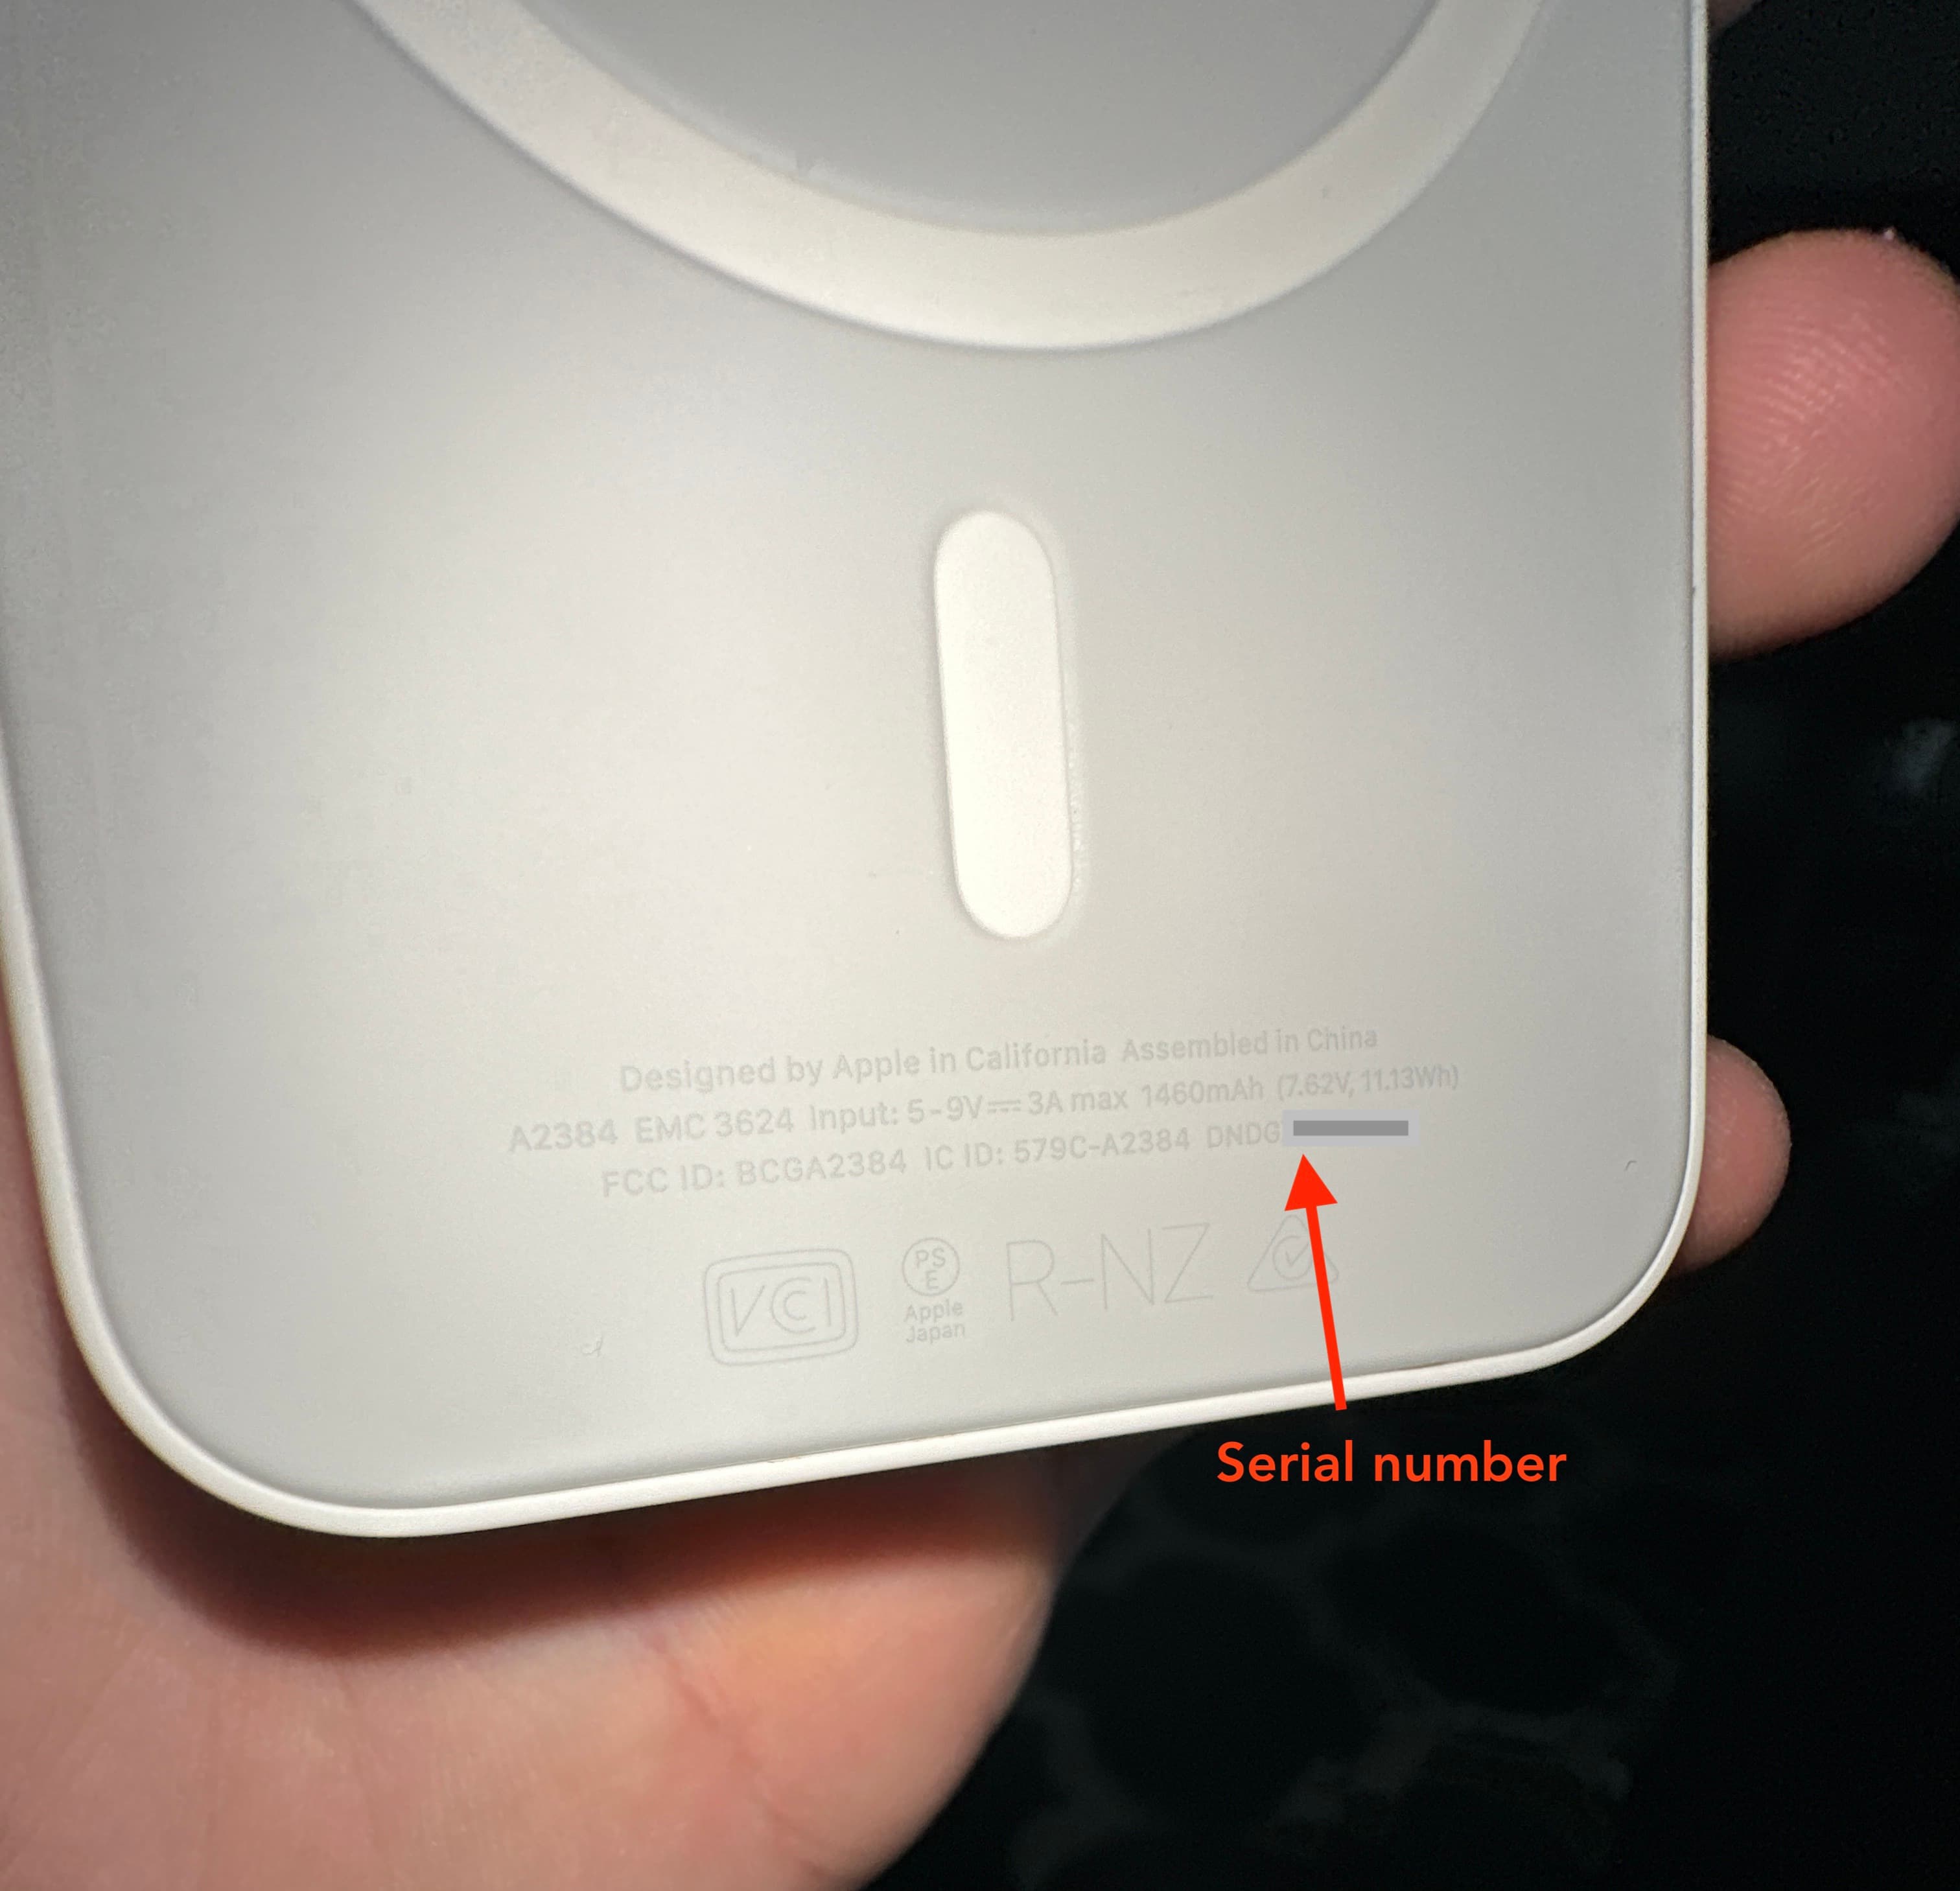 MagSafe Battery pack serial number printed on its back